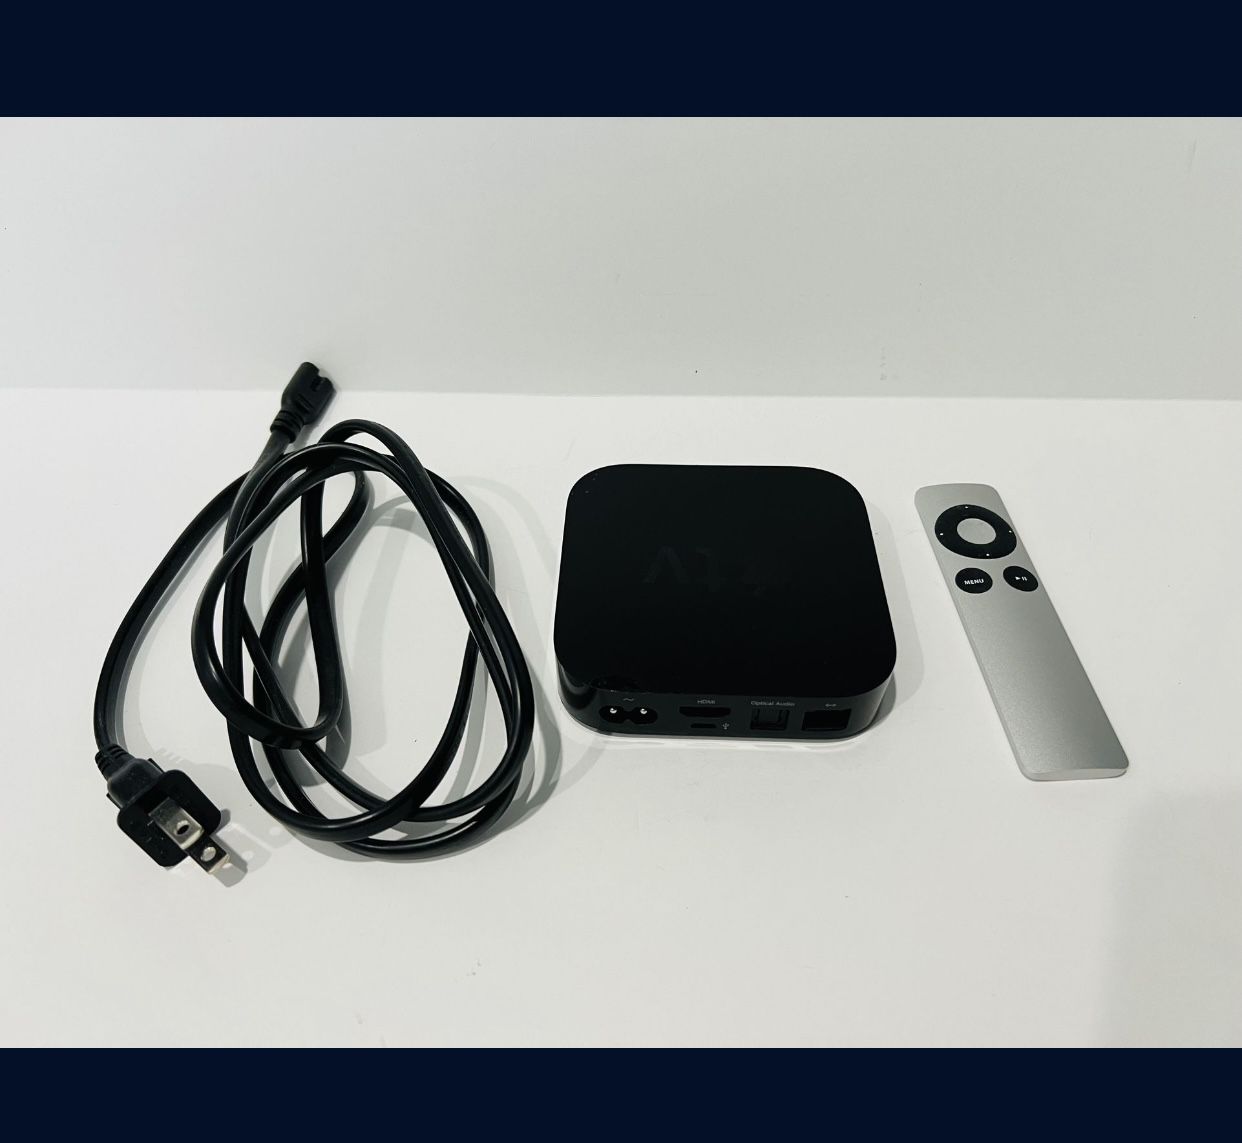 Apple TV (3rd Generation) Smart Media Streaming with Original Remote & Cable